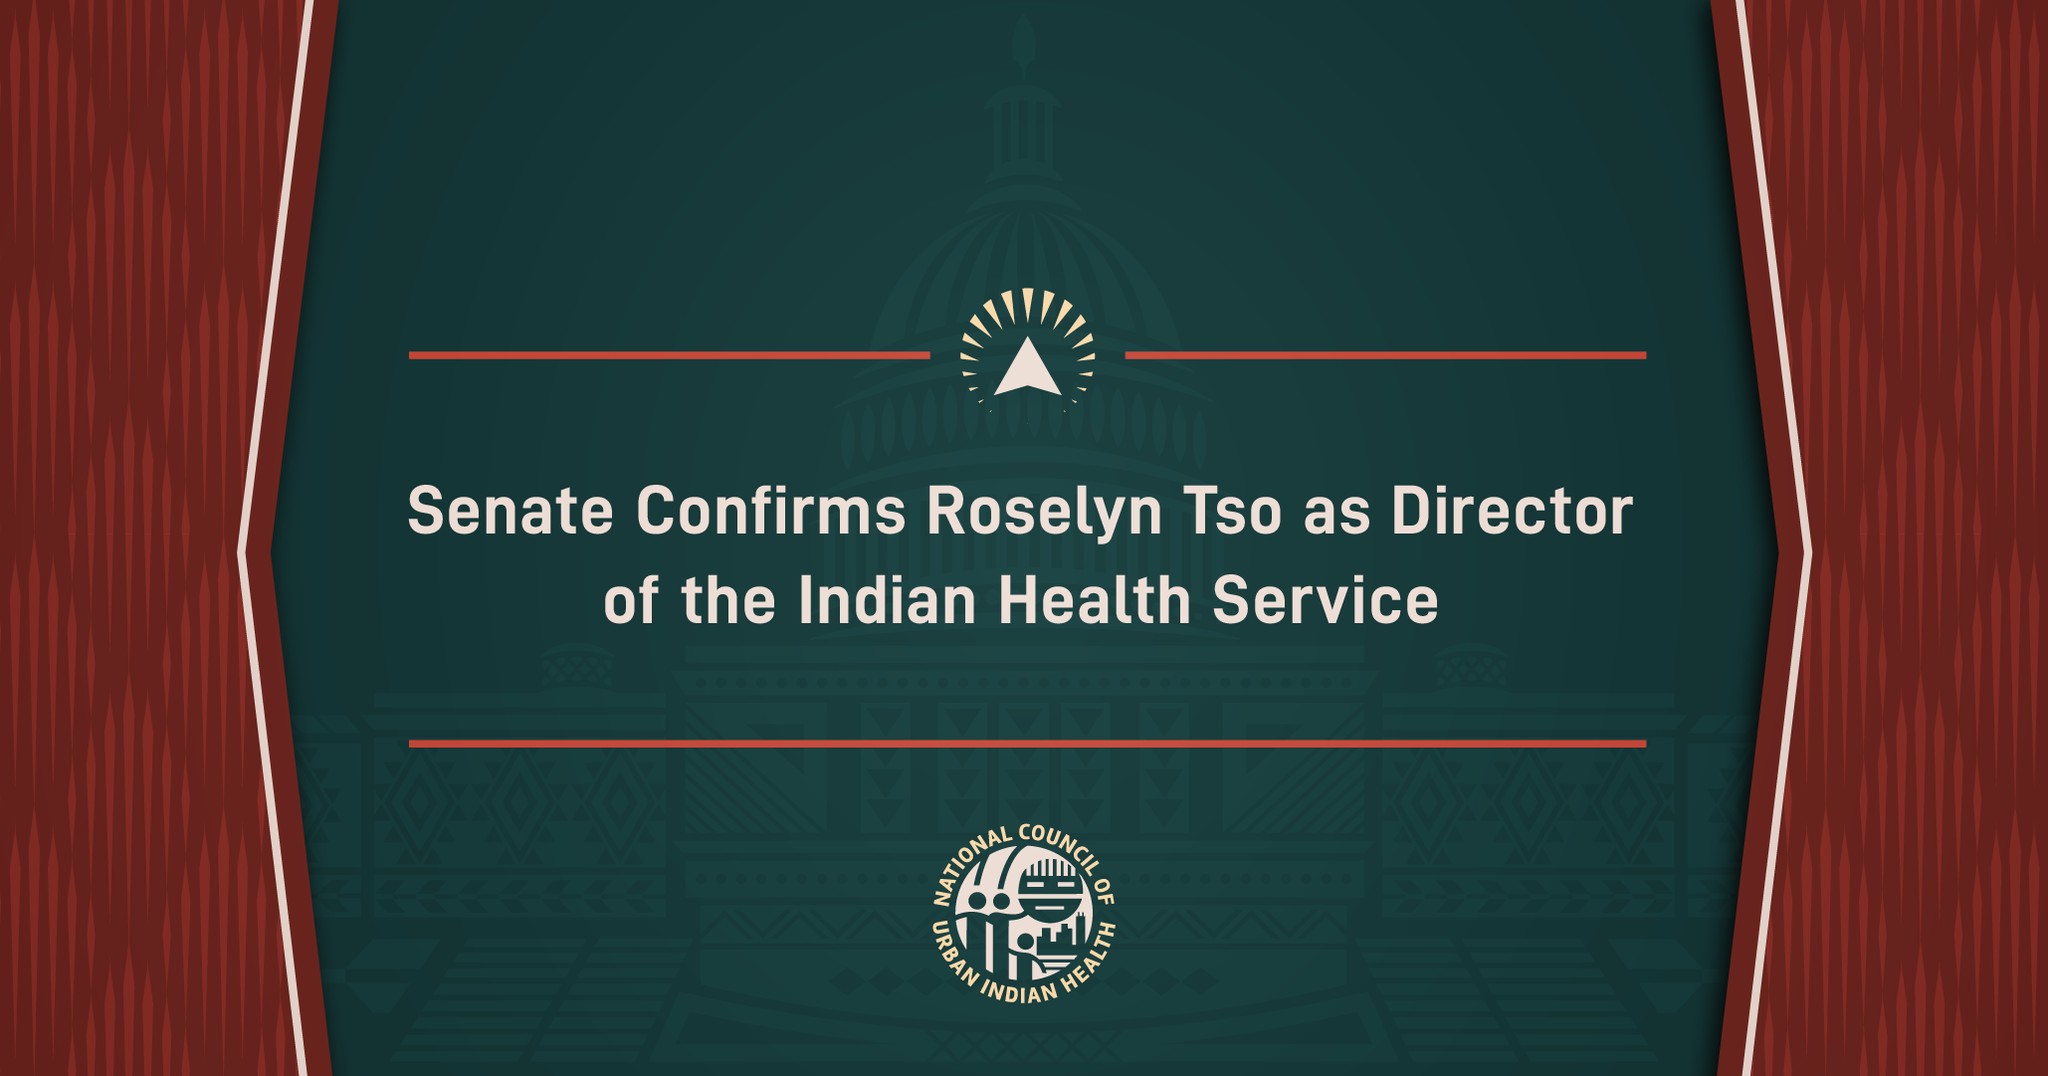 NCUIH - Senate Confirms Roselyn Tso as Director of the Indian Health Service